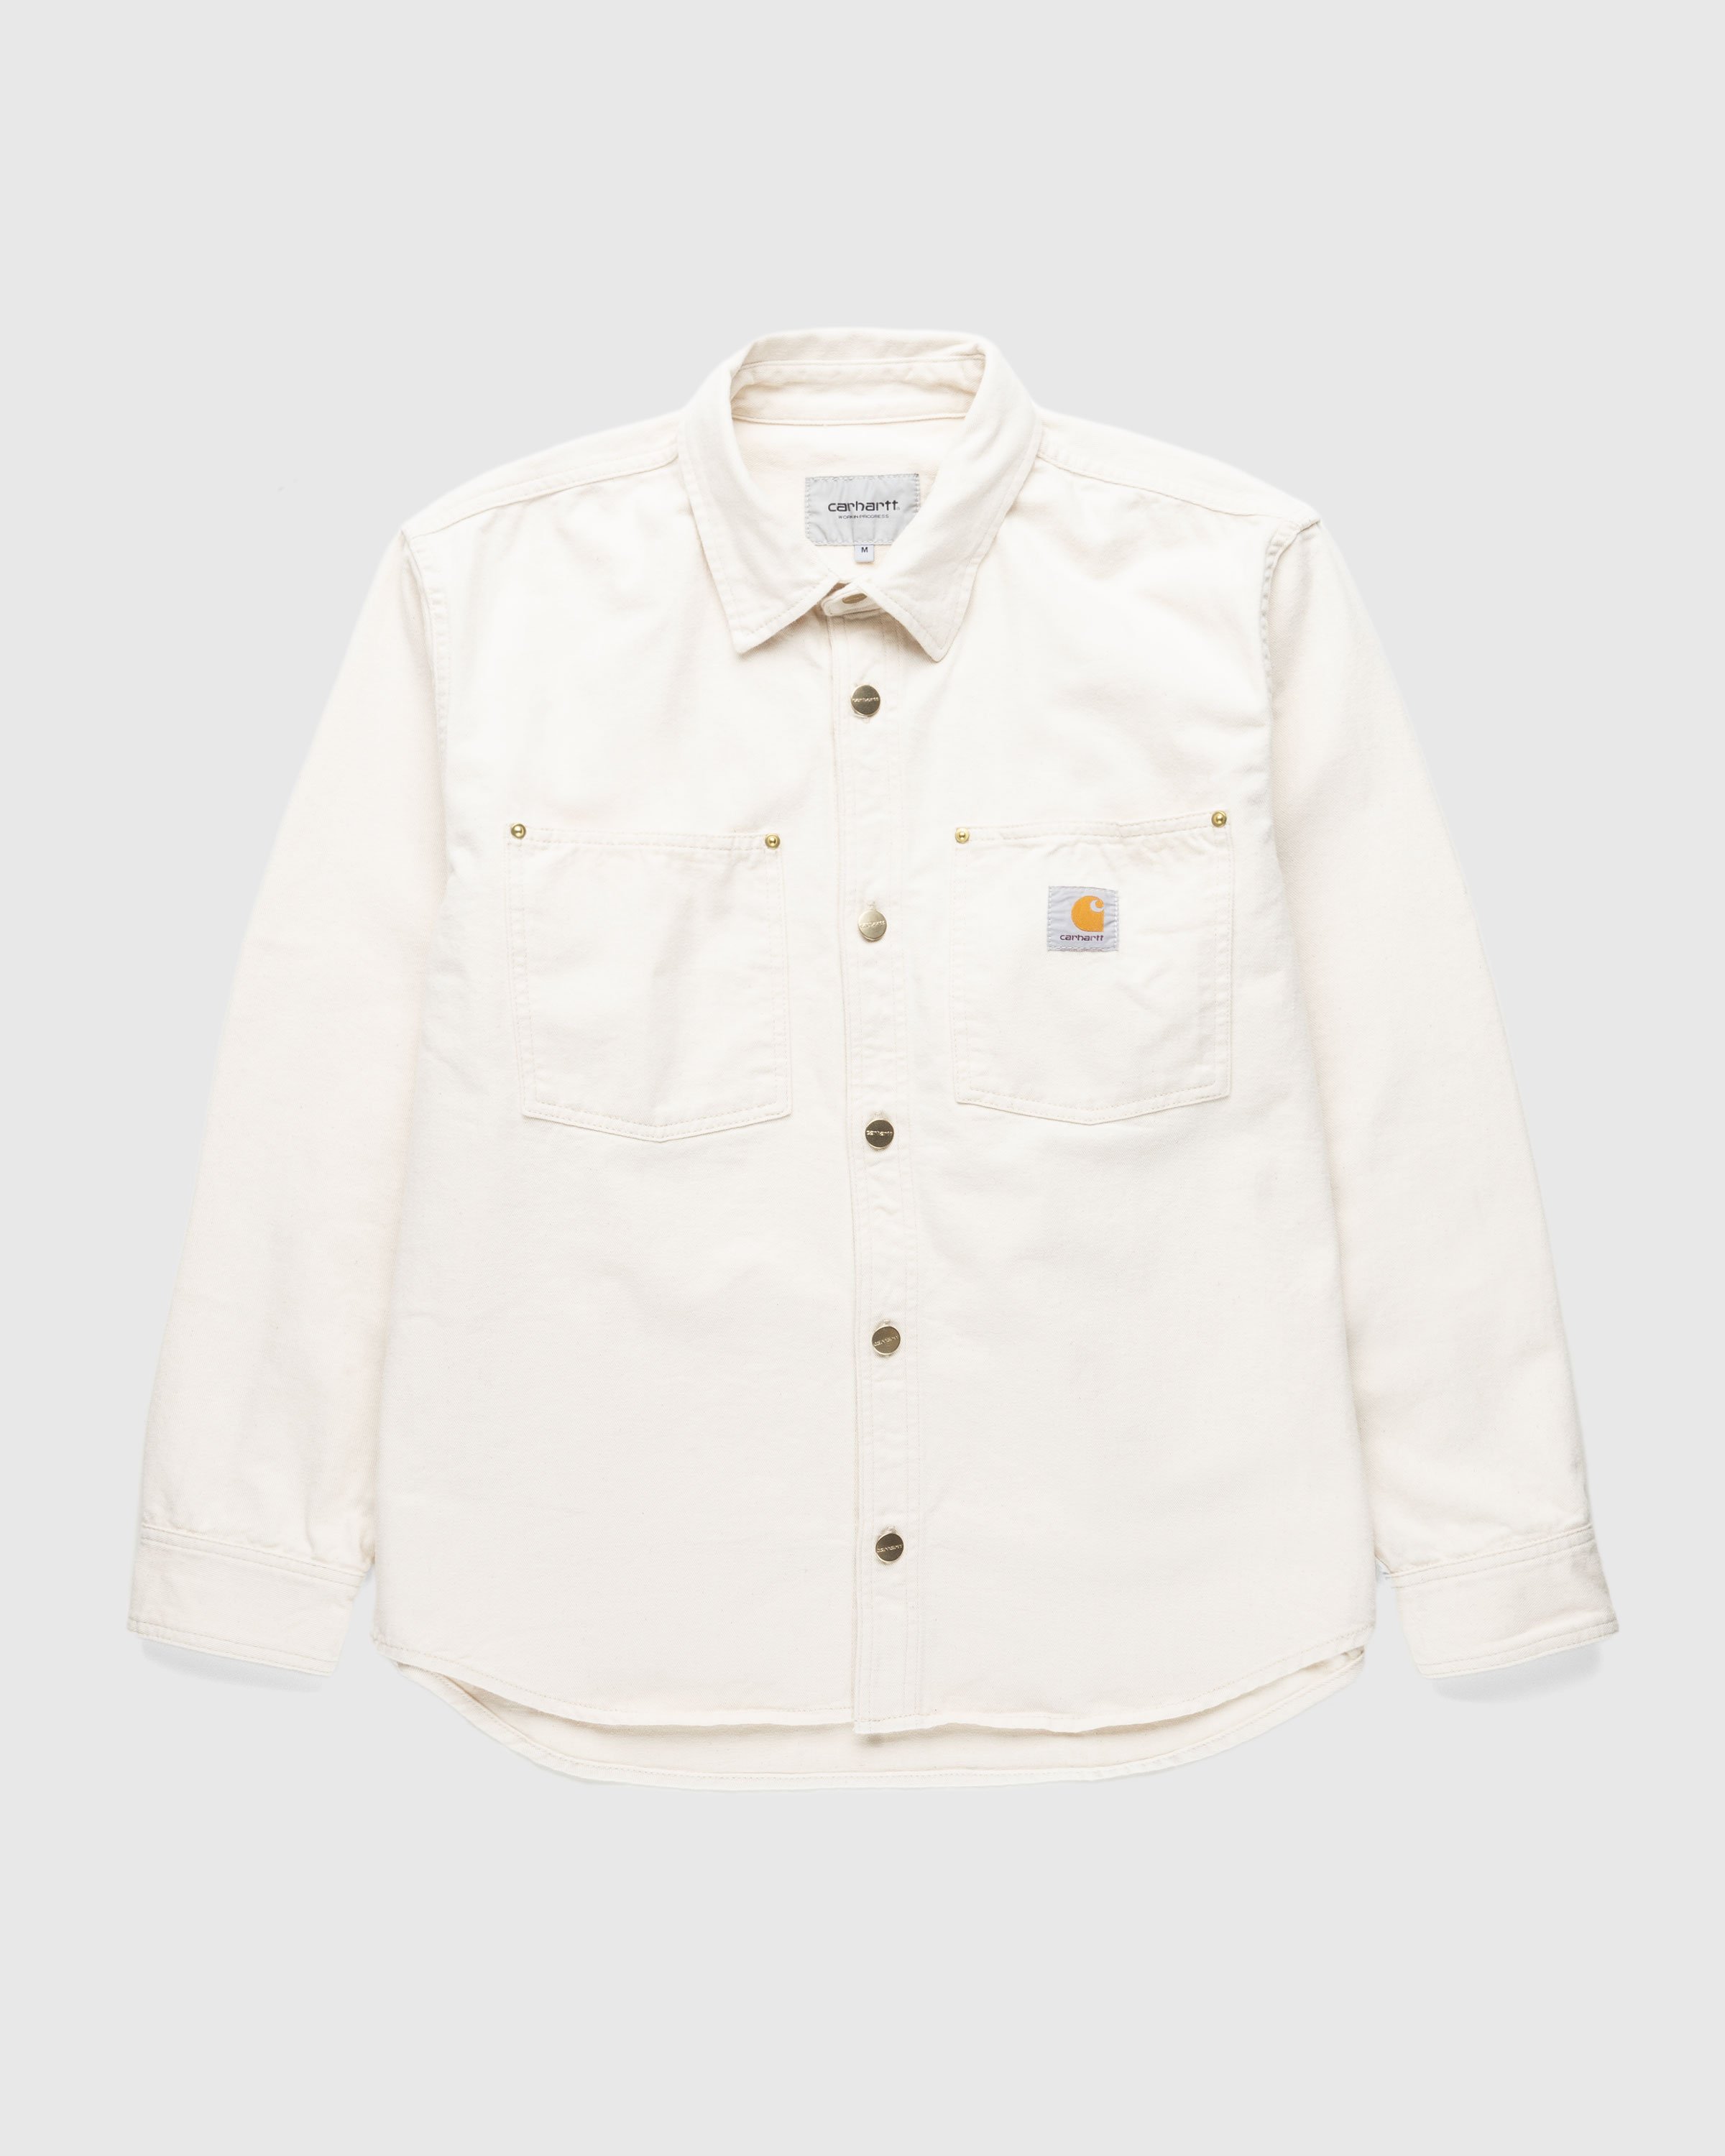 Carhartt WIP - Derby Shirt Jacket Natural - Clothing - White - Image 1